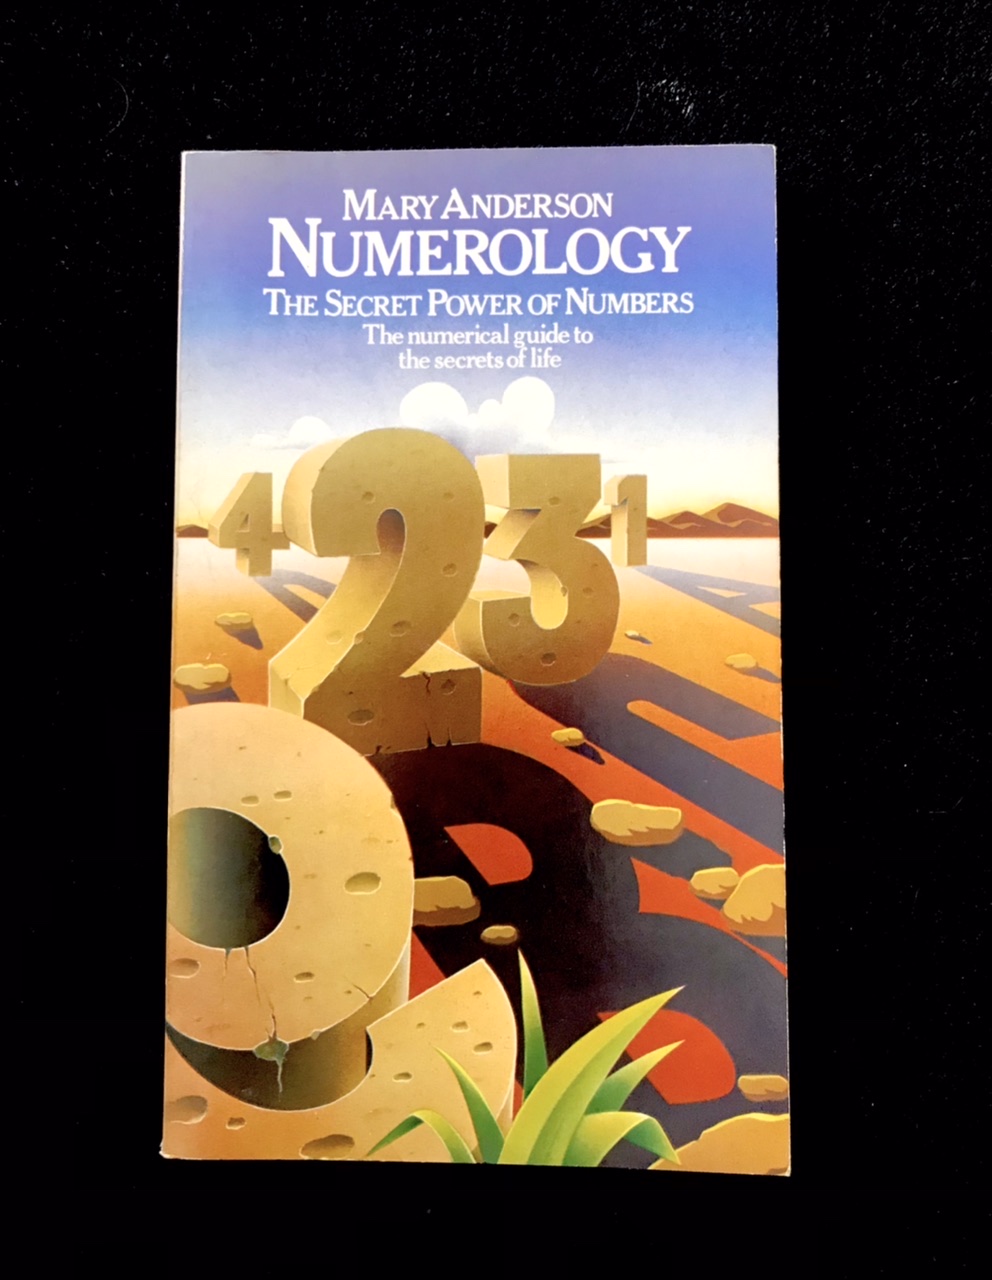 Numerology by Mary Anderson